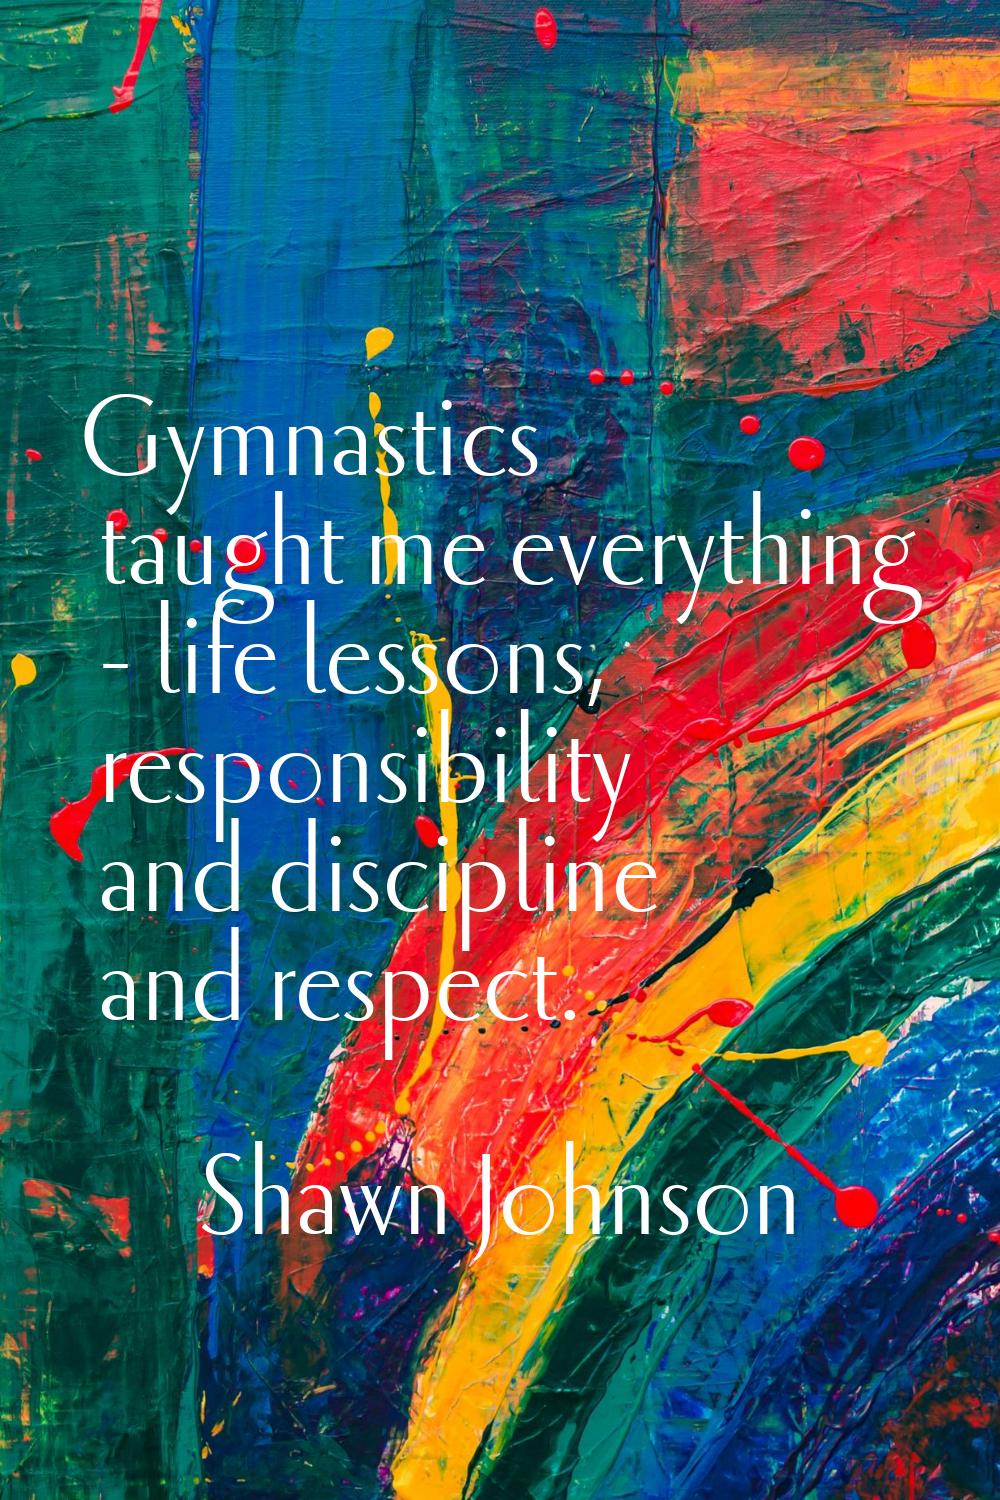 Gymnastics taught me everything - life lessons, responsibility and discipline and respect.